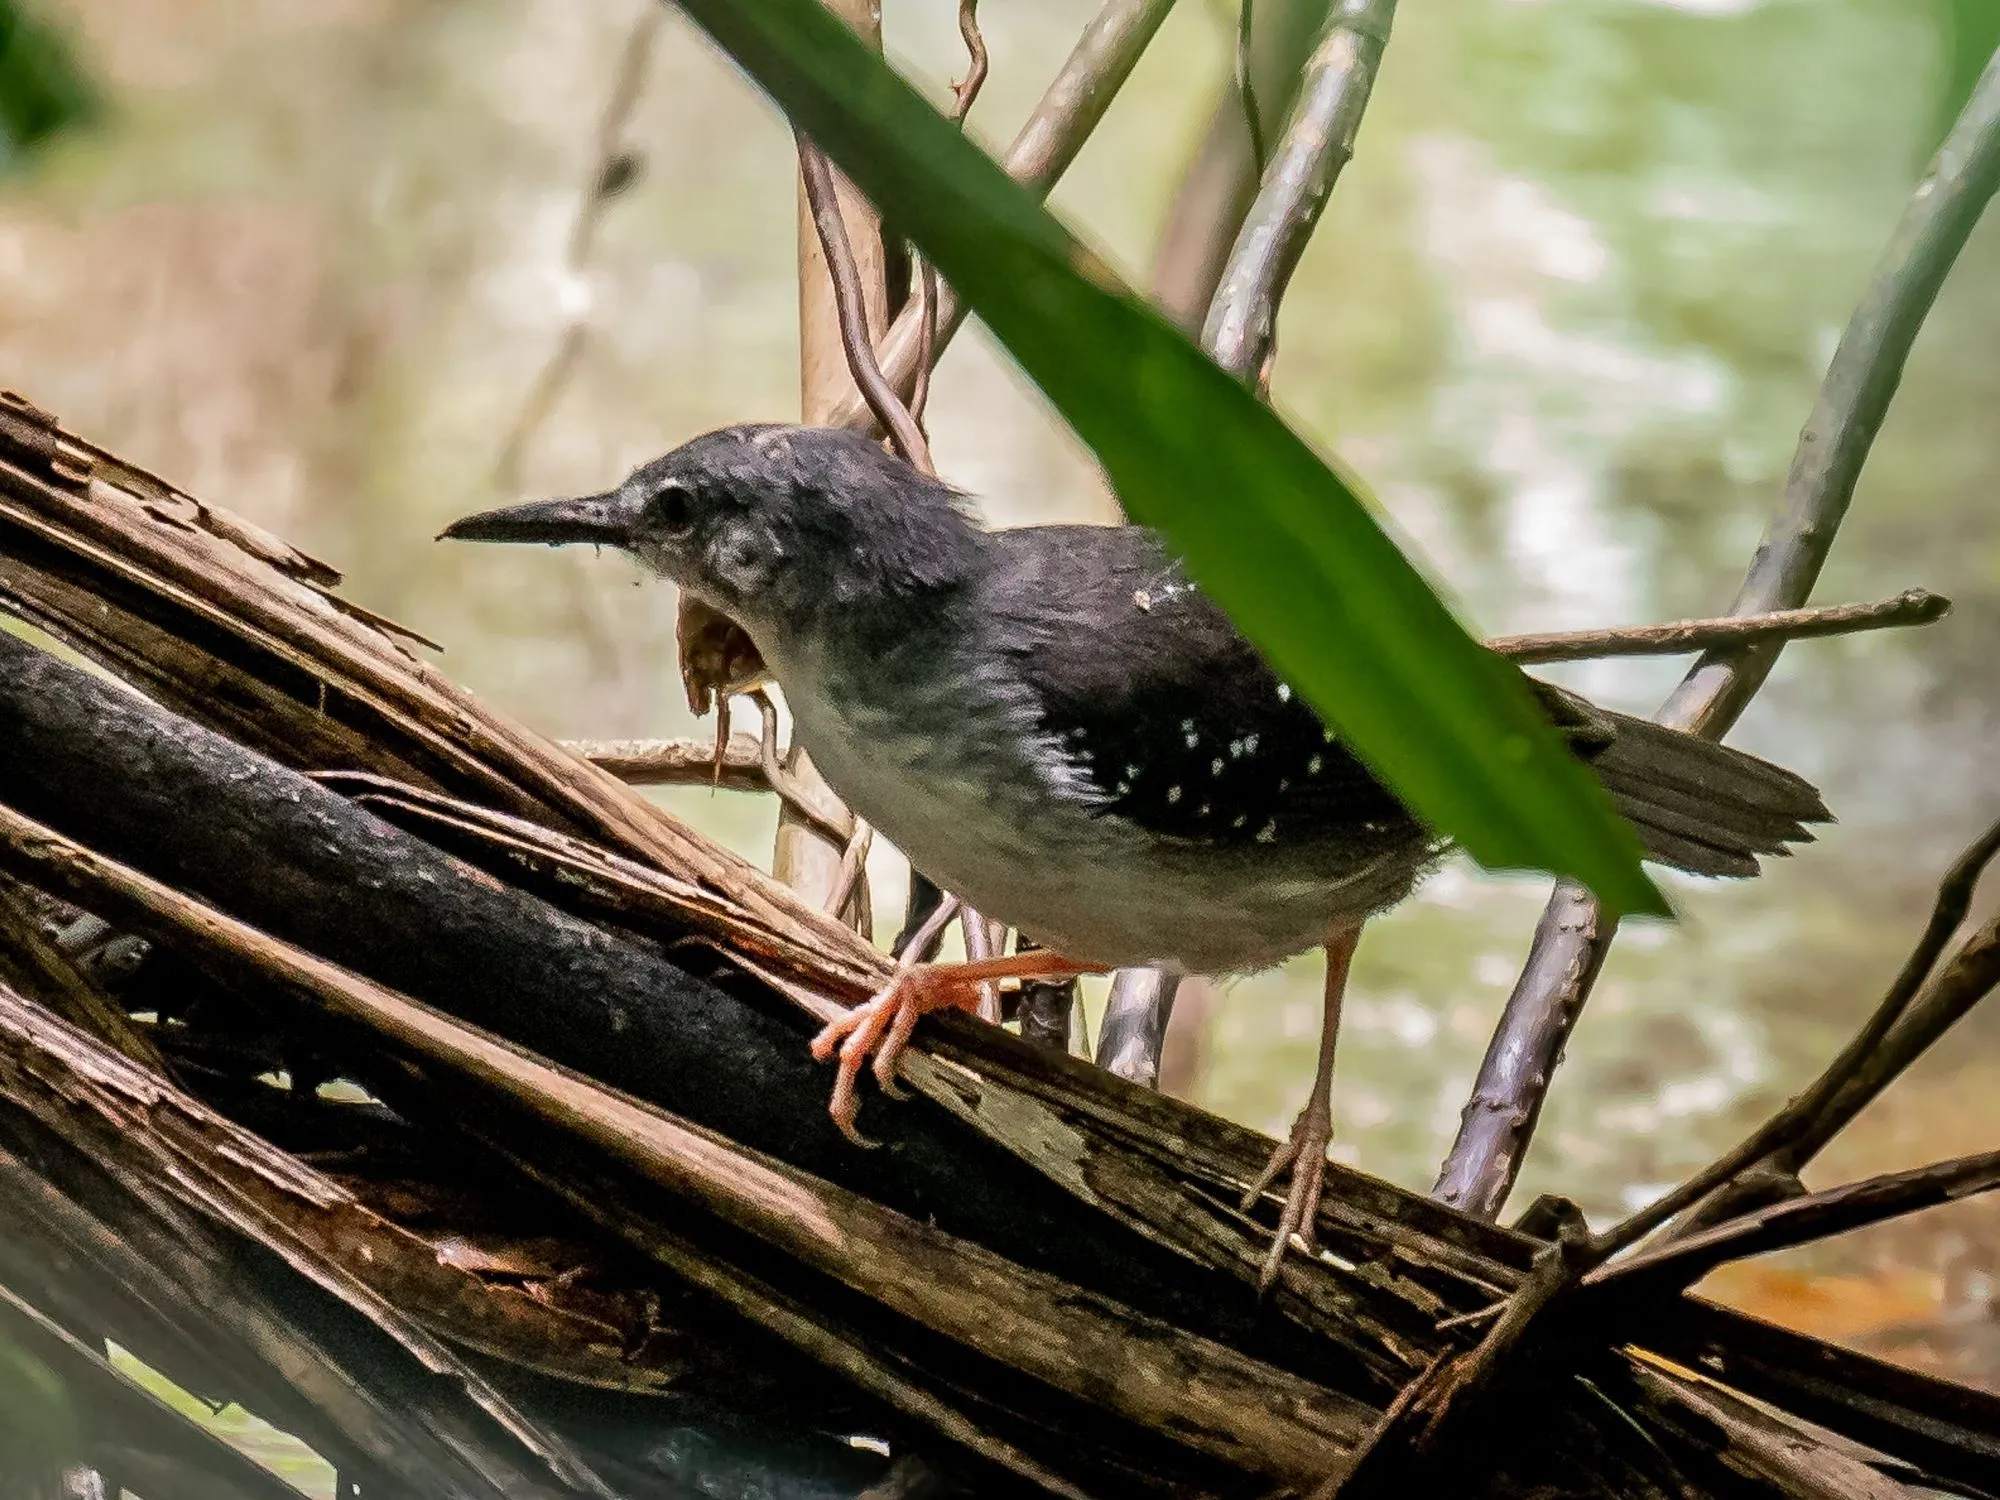 These silvered antbird facts would make you love them.